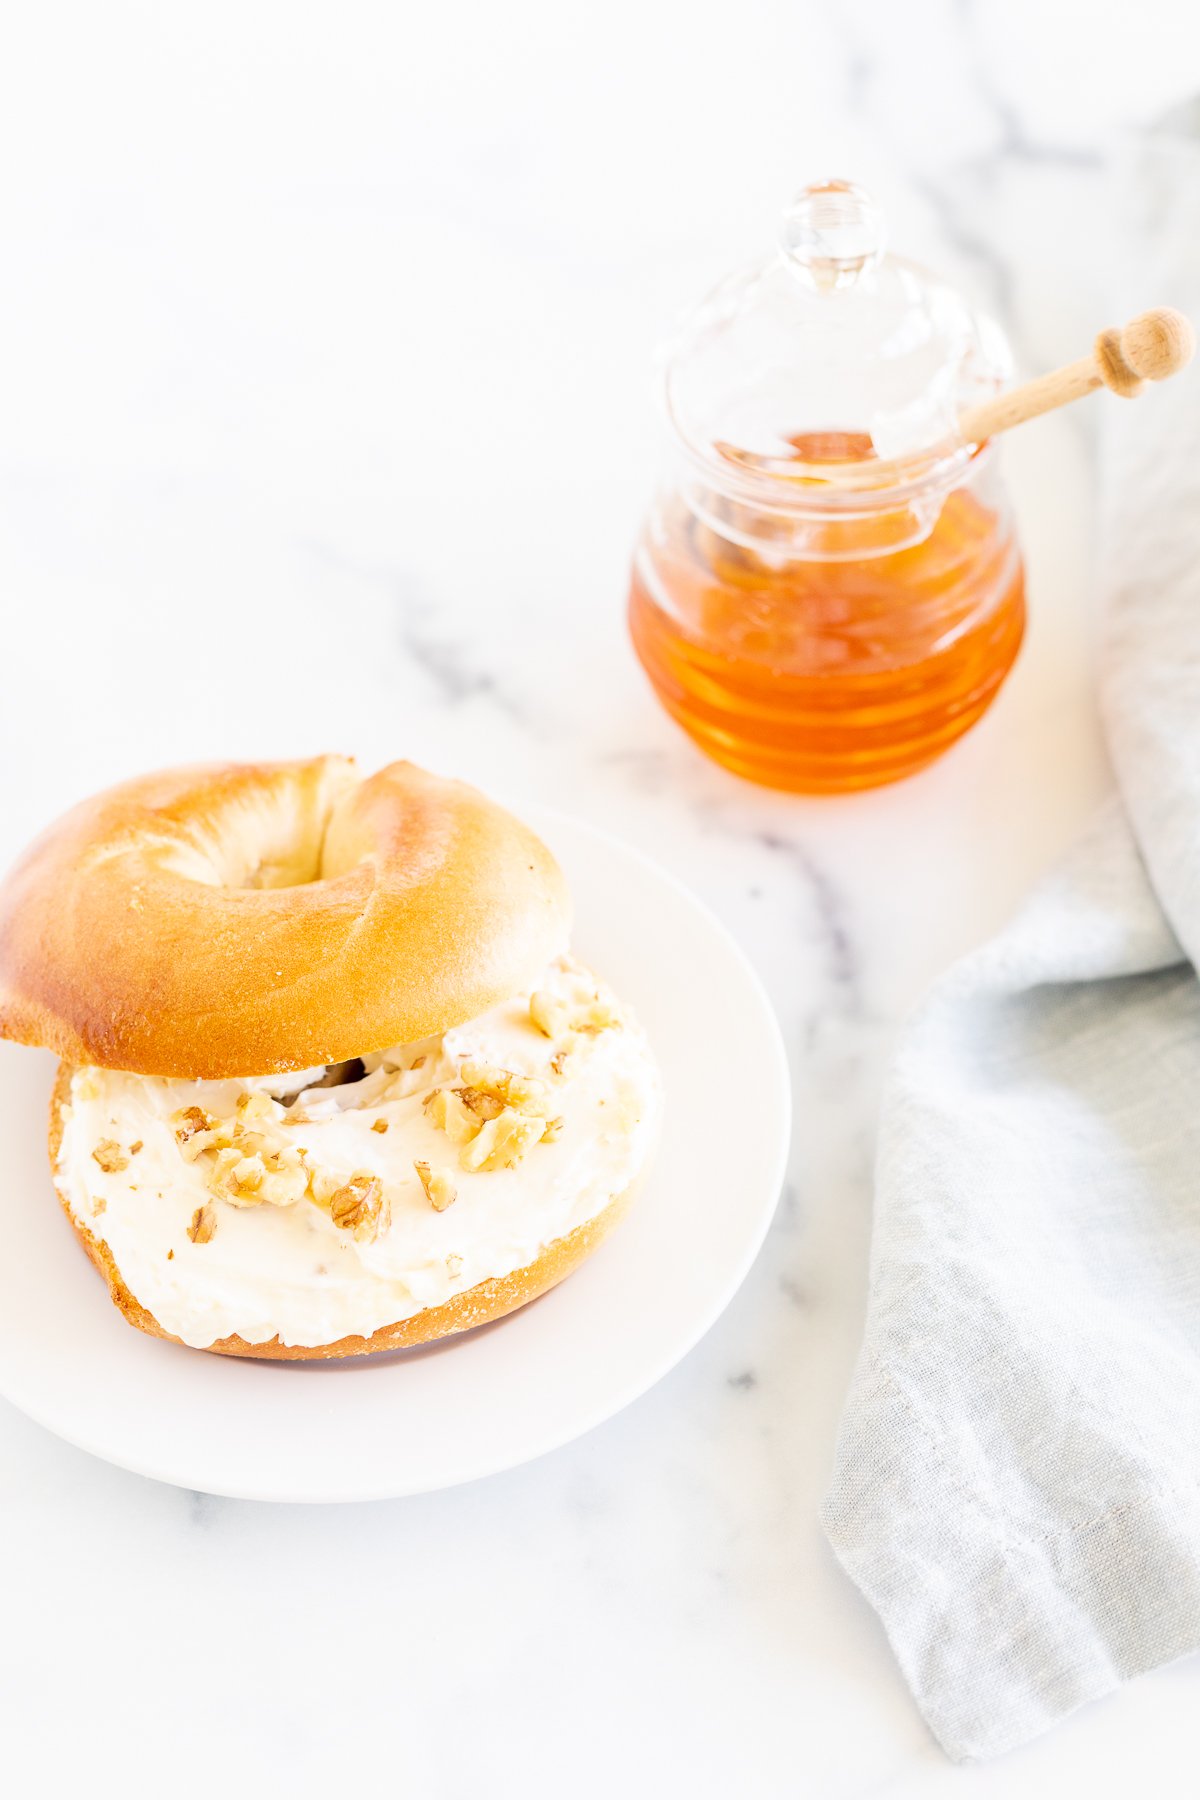 A Honey Walnut cream cheese bagel on a white plate.